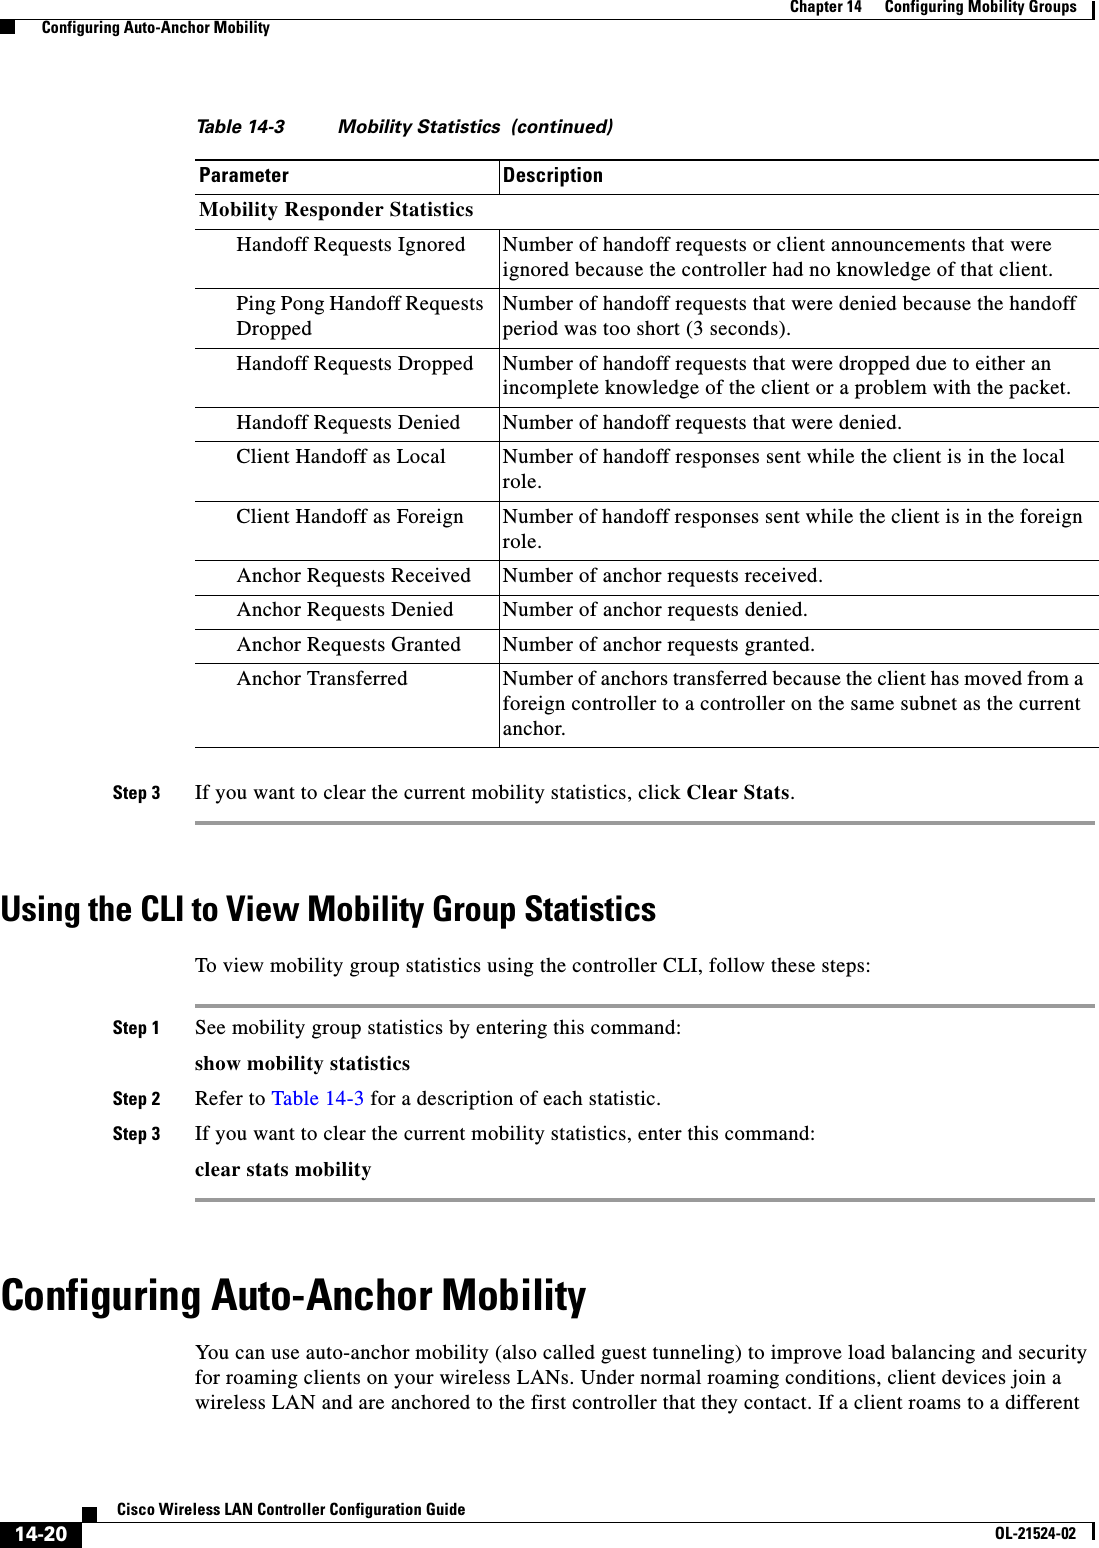  14-20Cisco Wireless LAN Controller Configuration GuideOL-21524-02Chapter 14      Configuring Mobility Groups  Configuring Auto-Anchor MobilityStep 3 If you want to clear the current mobility statistics, click Clear Stats.Using the CLI to View Mobility Group StatisticsTo view mobility group statistics using the controller CLI, follow these steps:Step 1 See mobility group statistics by entering this command:show mobility statisticsStep 2 Refer to Table 14-3 for a description of each statistic.Step 3 If you want to clear the current mobility statistics, enter this command:clear stats mobilityConfiguring Auto-Anchor MobilityYou can use auto-anchor mobility (also called guest tunneling) to improve load balancing and security for roaming clients on your wireless LANs. Under normal roaming conditions, client devices join a wireless LAN and are anchored to the first controller that they contact. If a client roams to a different Mobility Responder StatisticsHandoff Requests Ignored Number of handoff requests or client announcements that were ignored because the controller had no knowledge of that client.Ping Pong Handoff Requests DroppedNumber of handoff requests that were denied because the handoff period was too short (3 seconds).Handoff Requests Dropped Number of handoff requests that were dropped due to either an incomplete knowledge of the client or a problem with the packet.Handoff Requests Denied Number of handoff requests that were denied.Client Handoff as Local Number of handoff responses sent while the client is in the local role.Client Handoff as Foreign Number of handoff responses sent while the client is in the foreign role.Anchor Requests Received Number of anchor requests received.Anchor Requests Denied Number of anchor requests denied.Anchor Requests Granted Number of anchor requests granted.Anchor Transferred Number of anchors transferred because the client has moved from a foreign controller to a controller on the same subnet as the current anchor.Table 14-3 Mobility Statistics  (continued)Parameter Description